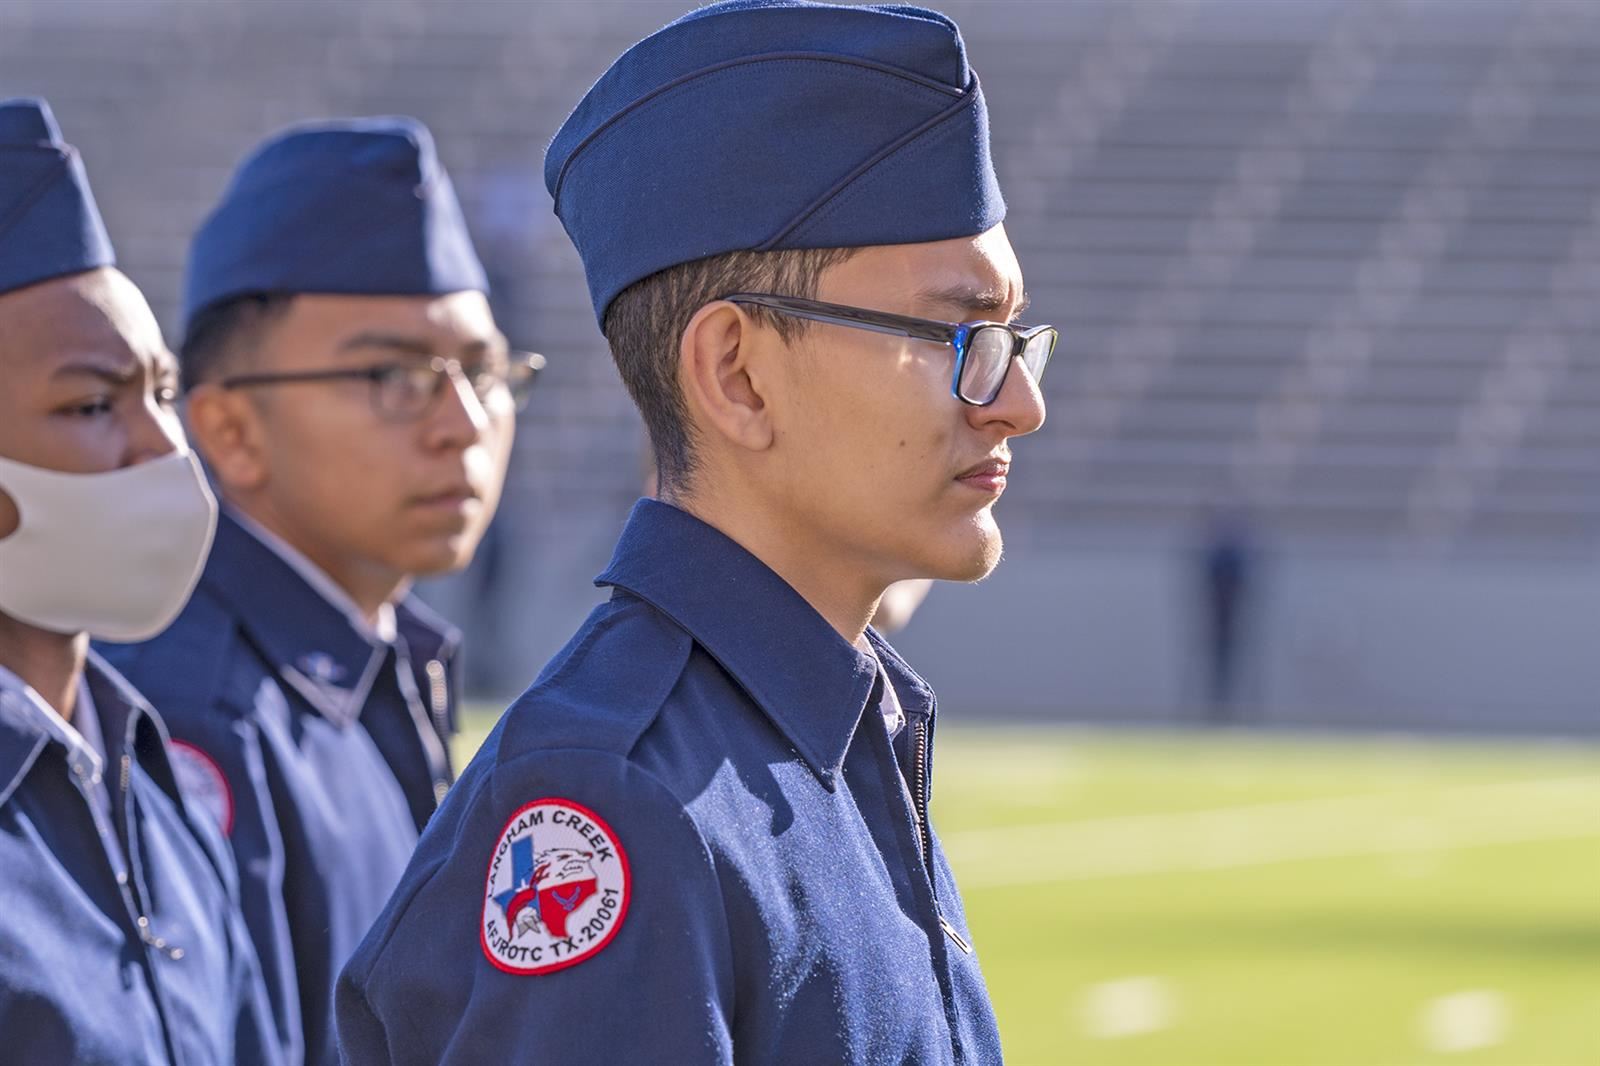 Langham Creek AFJROTC Unit TX-20061 joined more than 360 to receive the Distinguished Unit Award.